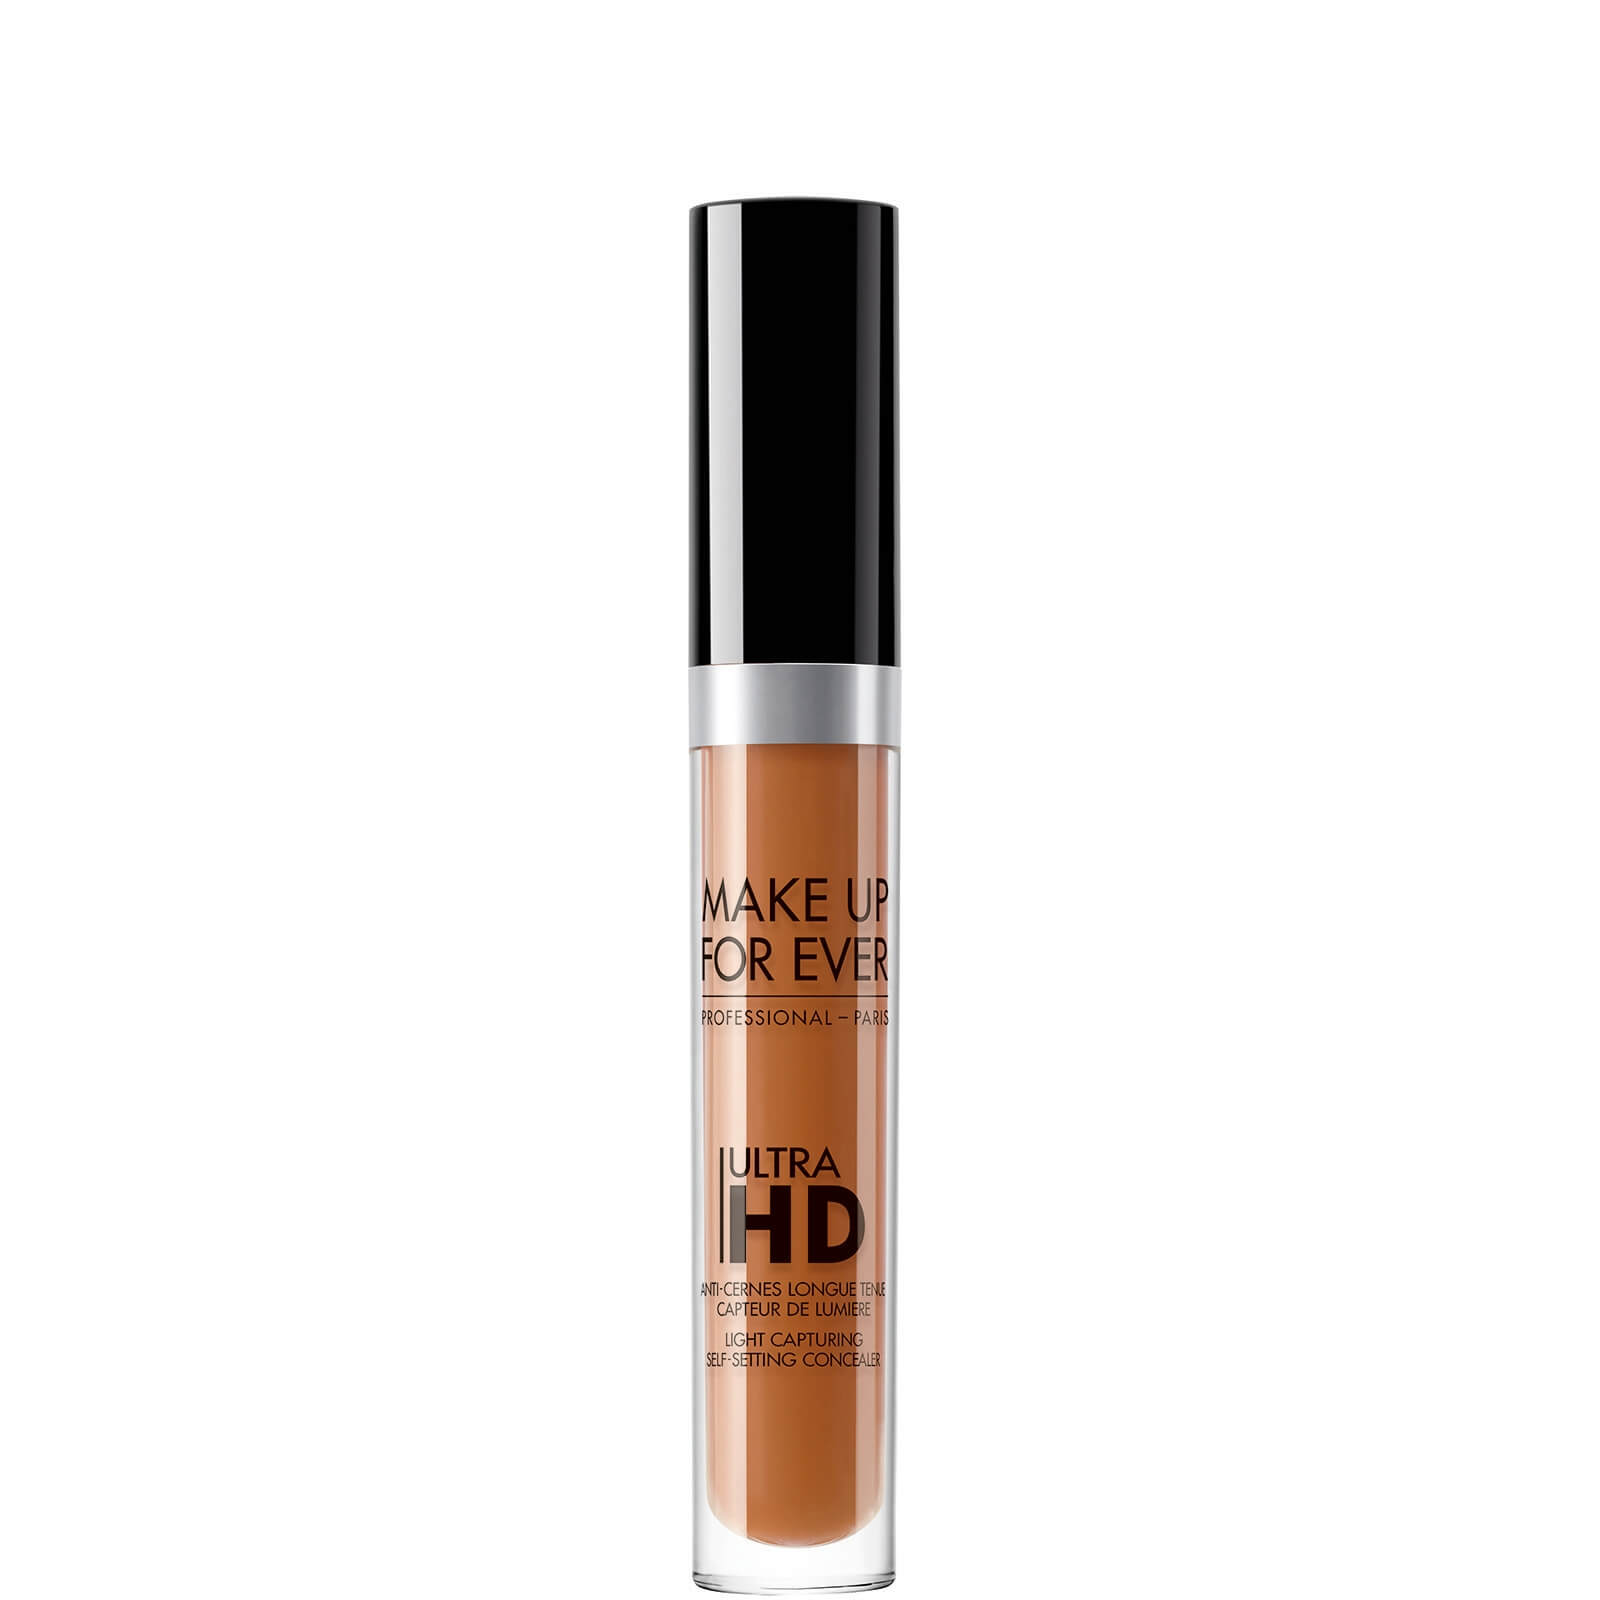 MAKE UP FOR EVER ultra Hd Self-Setting Concealer 5ml (Various Shades) - - 51 Tawny